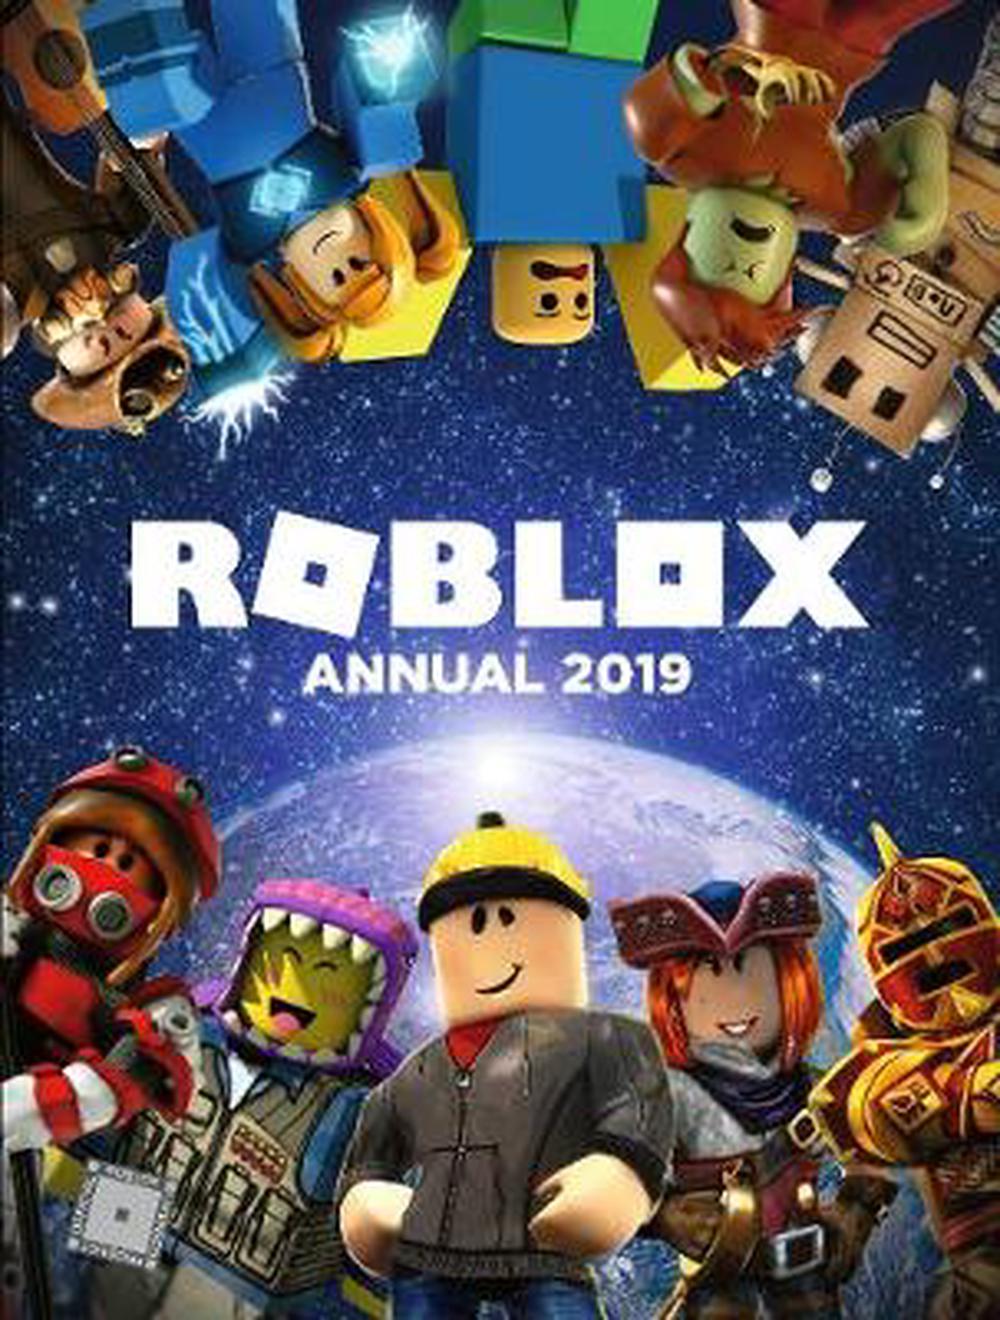 Roblox Annual 2019 By Egmont Publishing Uk Hardcover 9781405291156 Buy Online At The Nile - roblox movie online